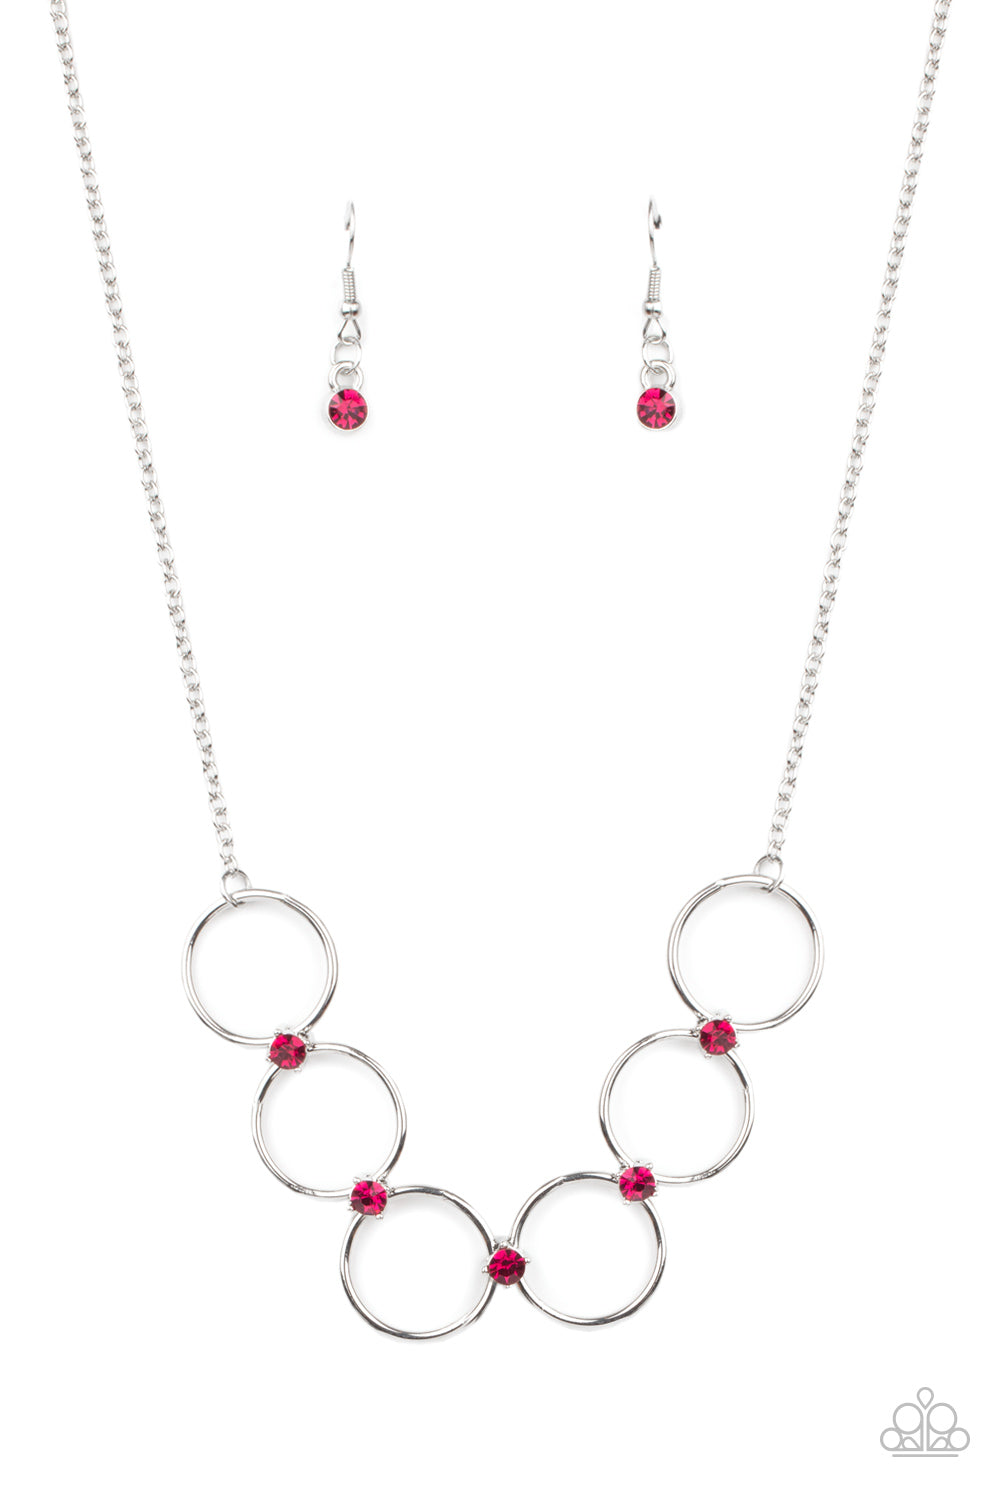 Regal Society - Pink and Silver Fashion Necklace - Paparazzi Accessories - Glittery pink rhinestones link a dainty row of silver rings below the collar, creating a regal minimalist inspired display. Features an adjustable clasp closure. Sold as one individual necklace.